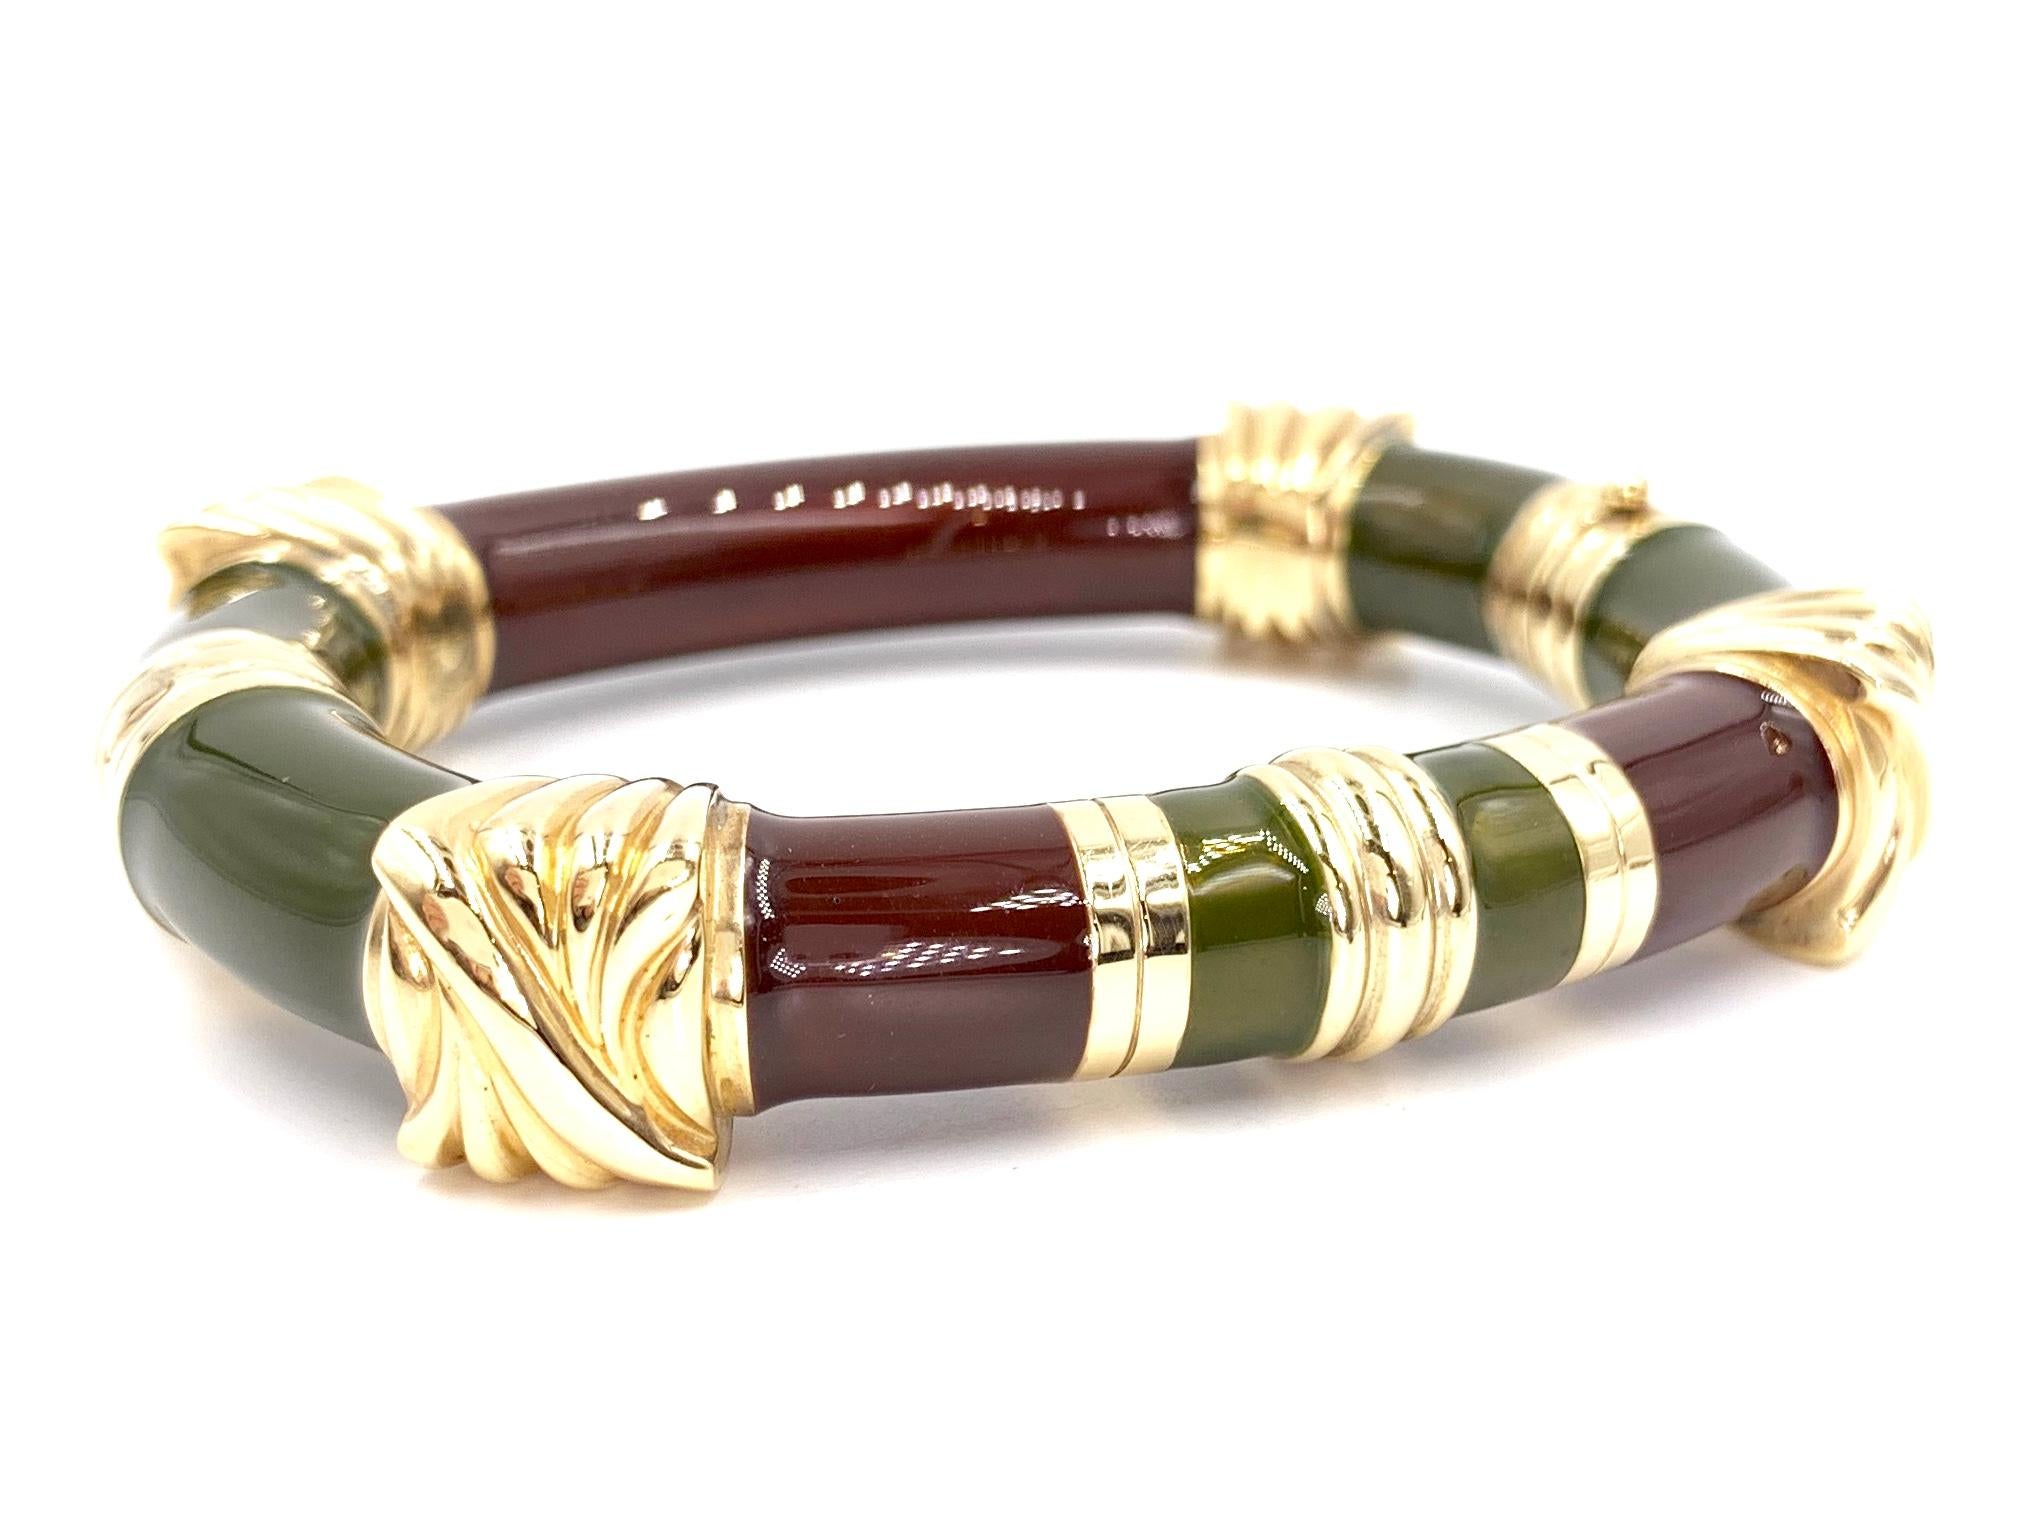 This fashionable bangle is made from sterling silver that has been hand painted with deep chocolate brownish-burgundy and olive green enamel with 14 karat yellow gold accents. Width of bangle measures 10mm at the rounded enamel areas and 14mm at the